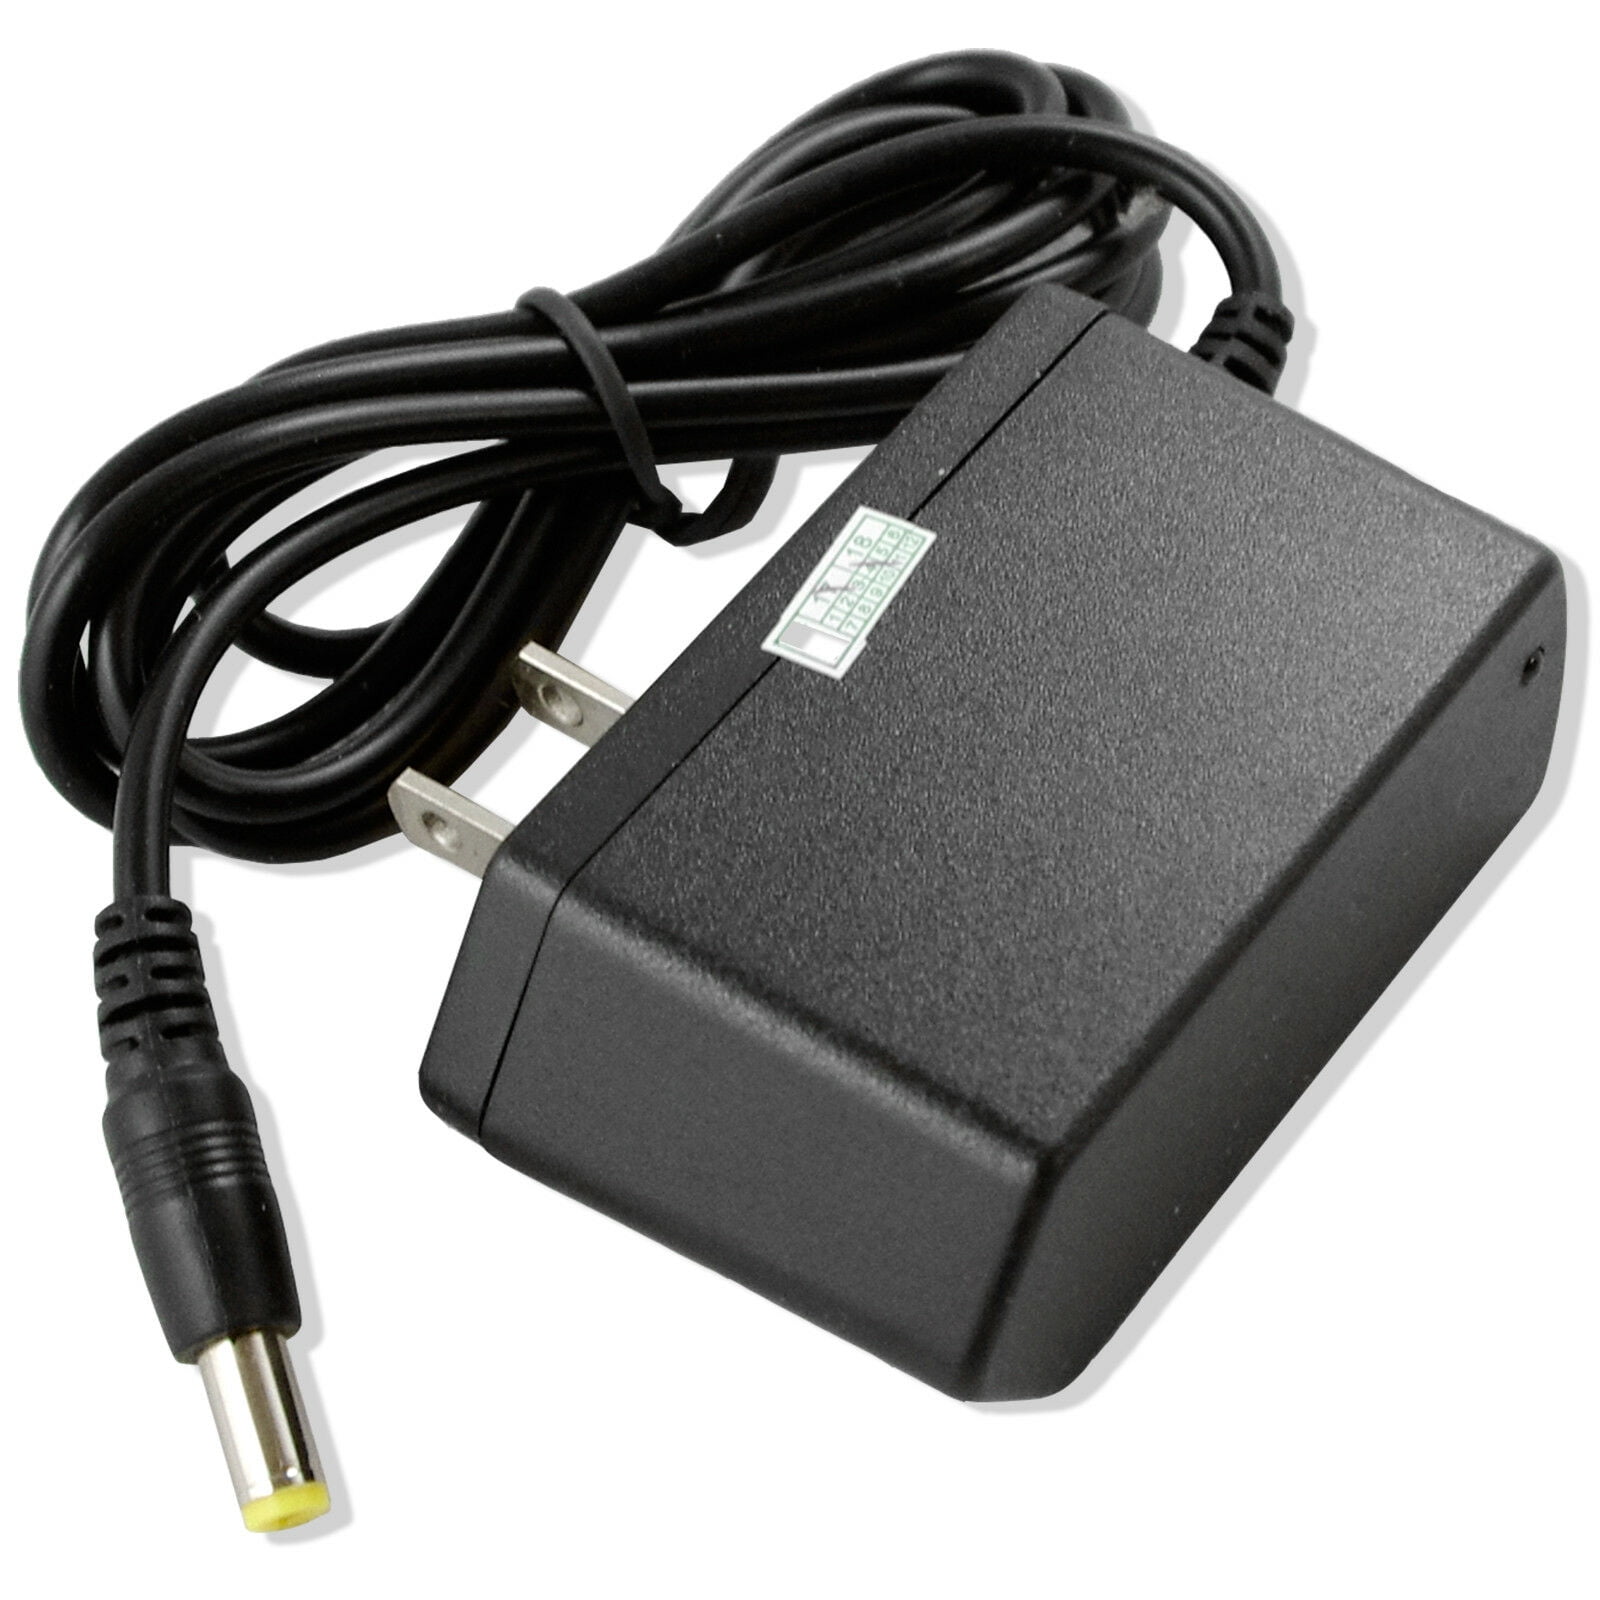 AC/DC Adapter Power Supply Cord For Casio CA-100 CA110 CT-770 CTK-3000 Keyboard 